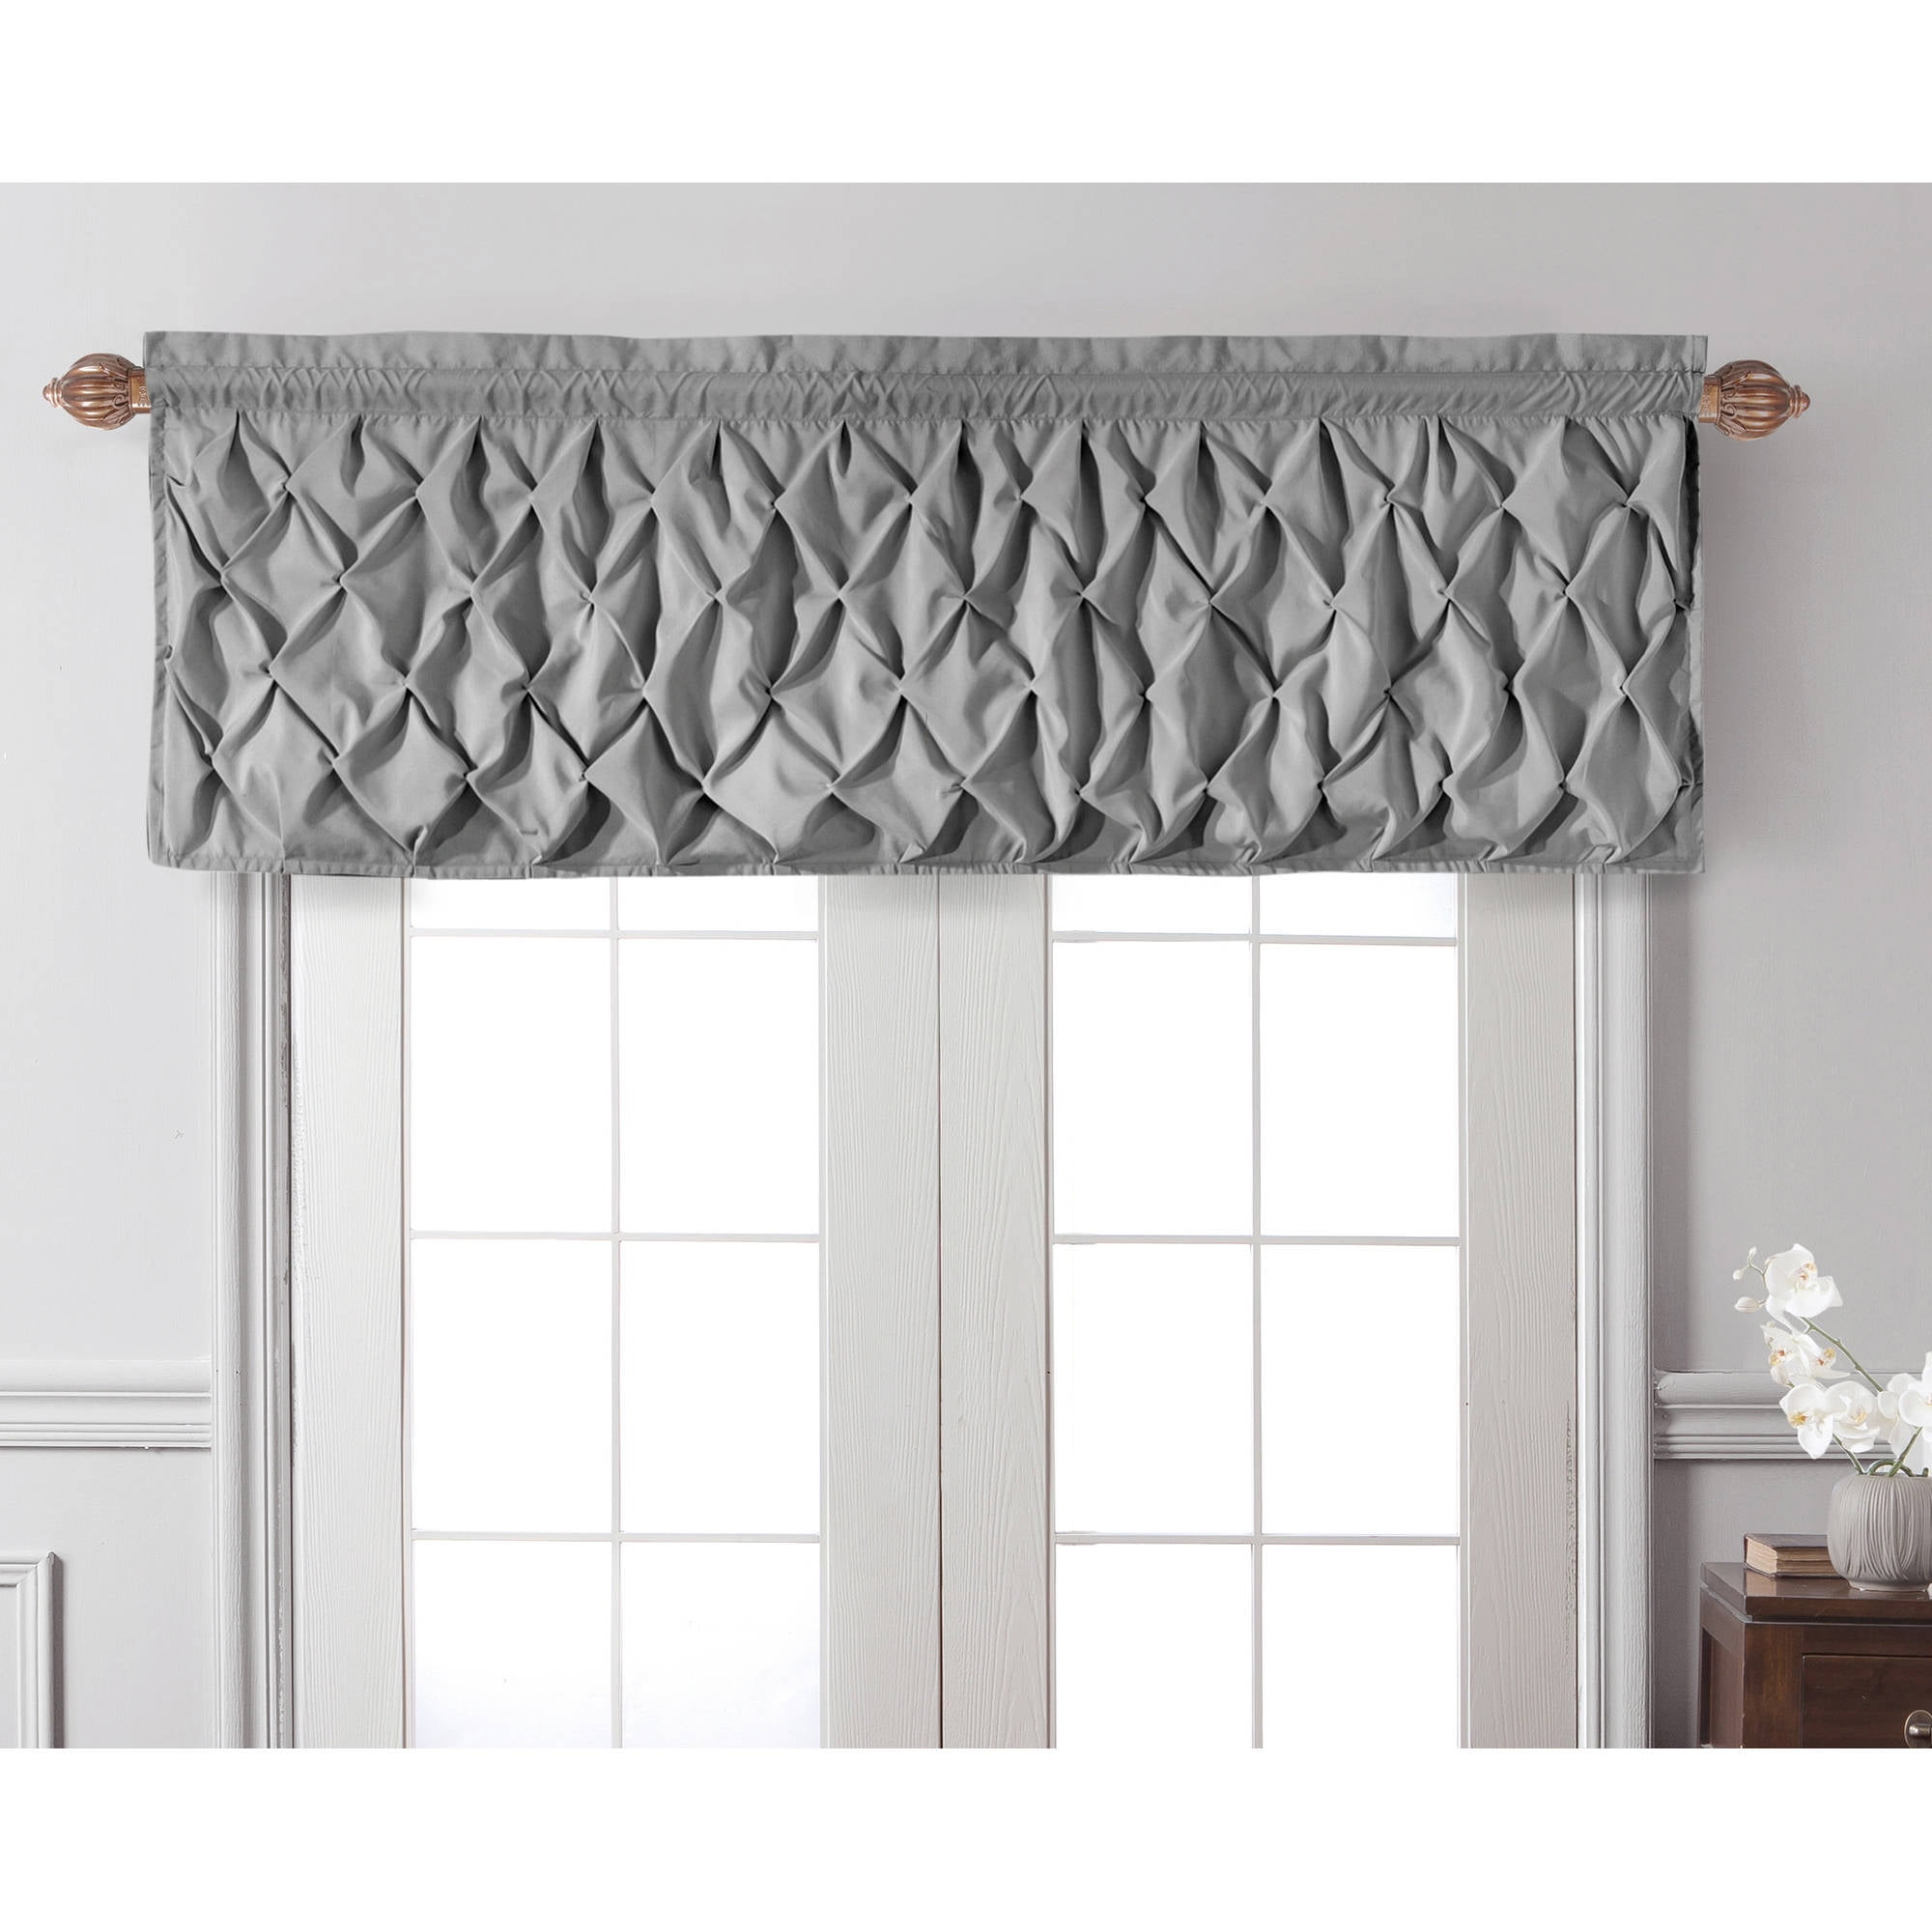 56" x 17" in. Solid Colors Choice-NEW Solid Tailored Textured Window Valance 